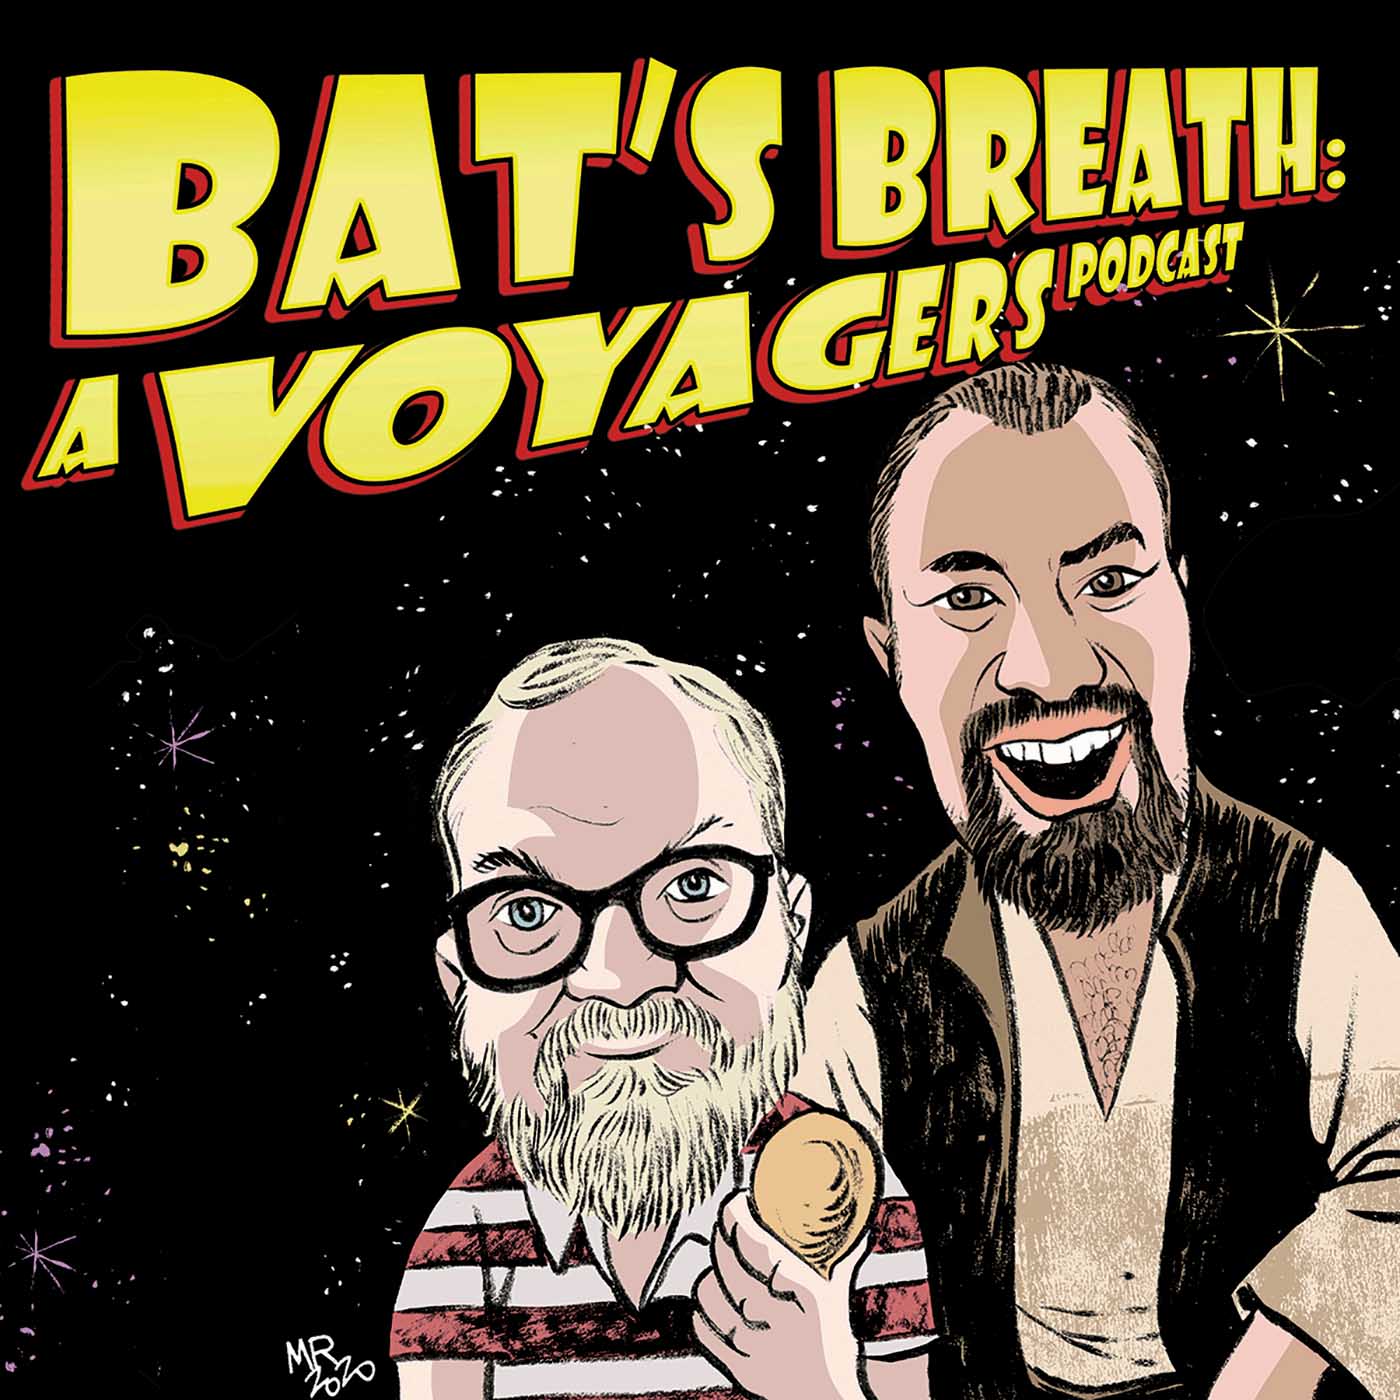 Artwork for Bat's Breath: A Voyagers Podcast